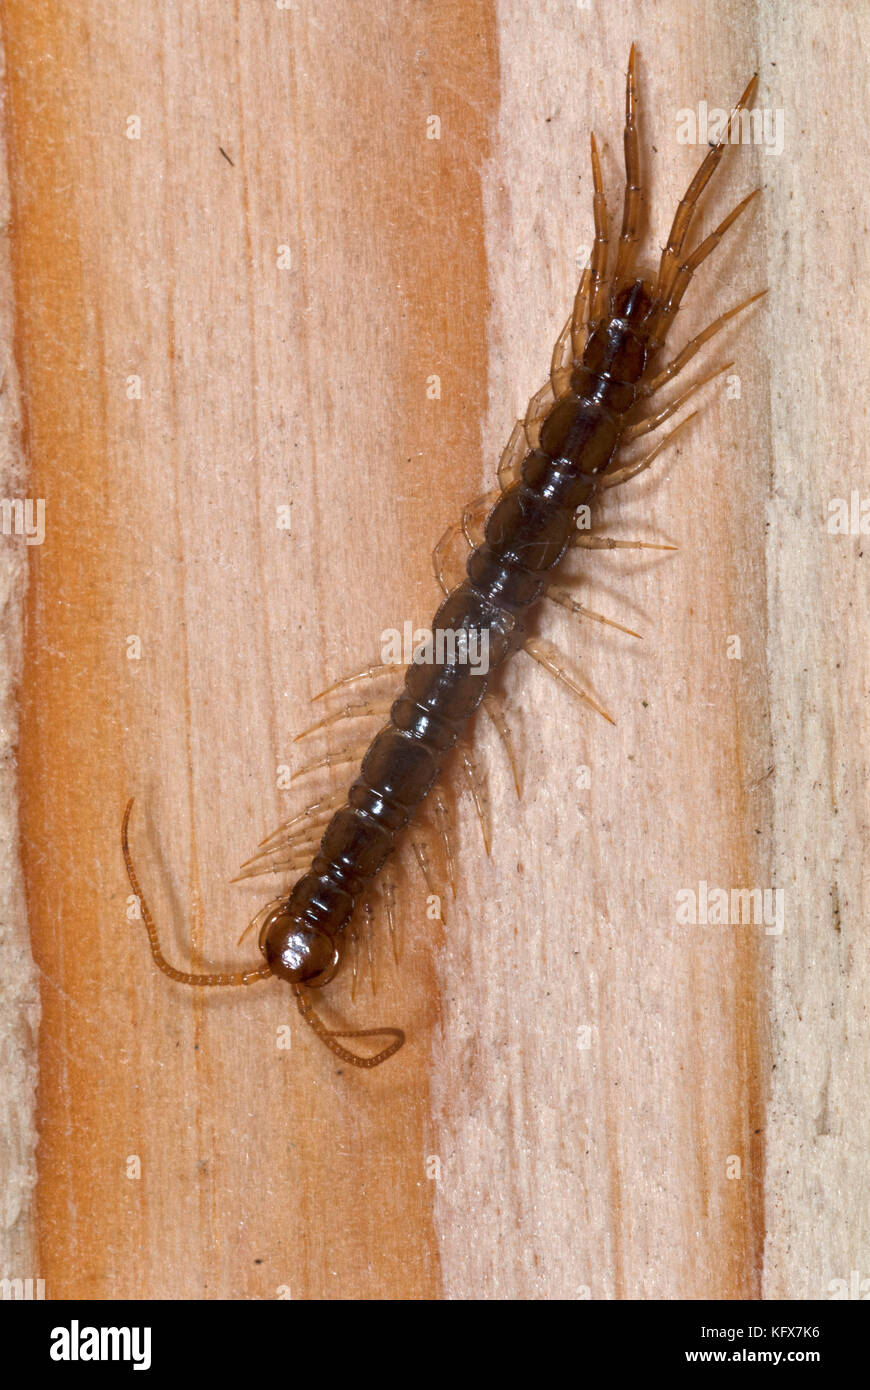 Common Centipede, Lithobius species, on wooden plank, decking, in garden, showing head, segmented body, antennae and legs Stock Photo